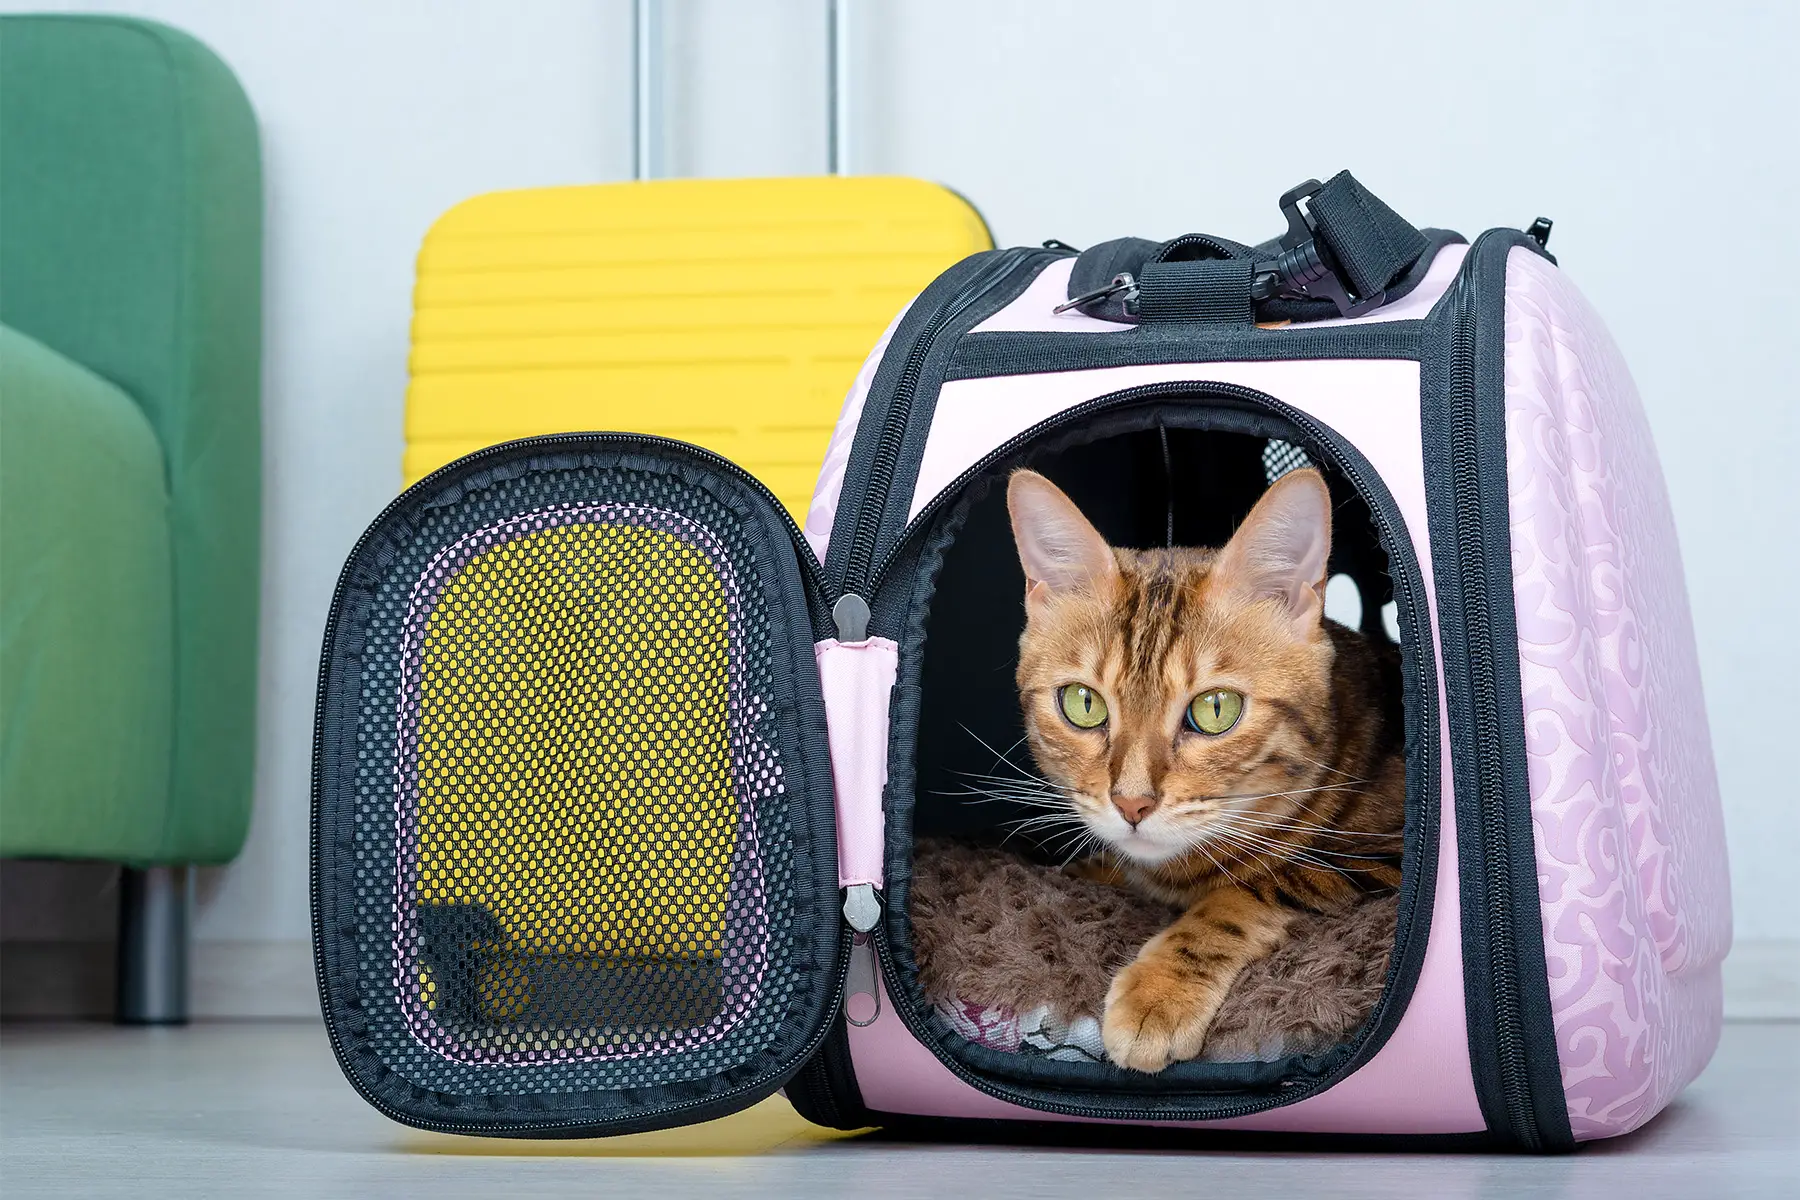 a cat in a soft carrier on the floor next to a suitcase